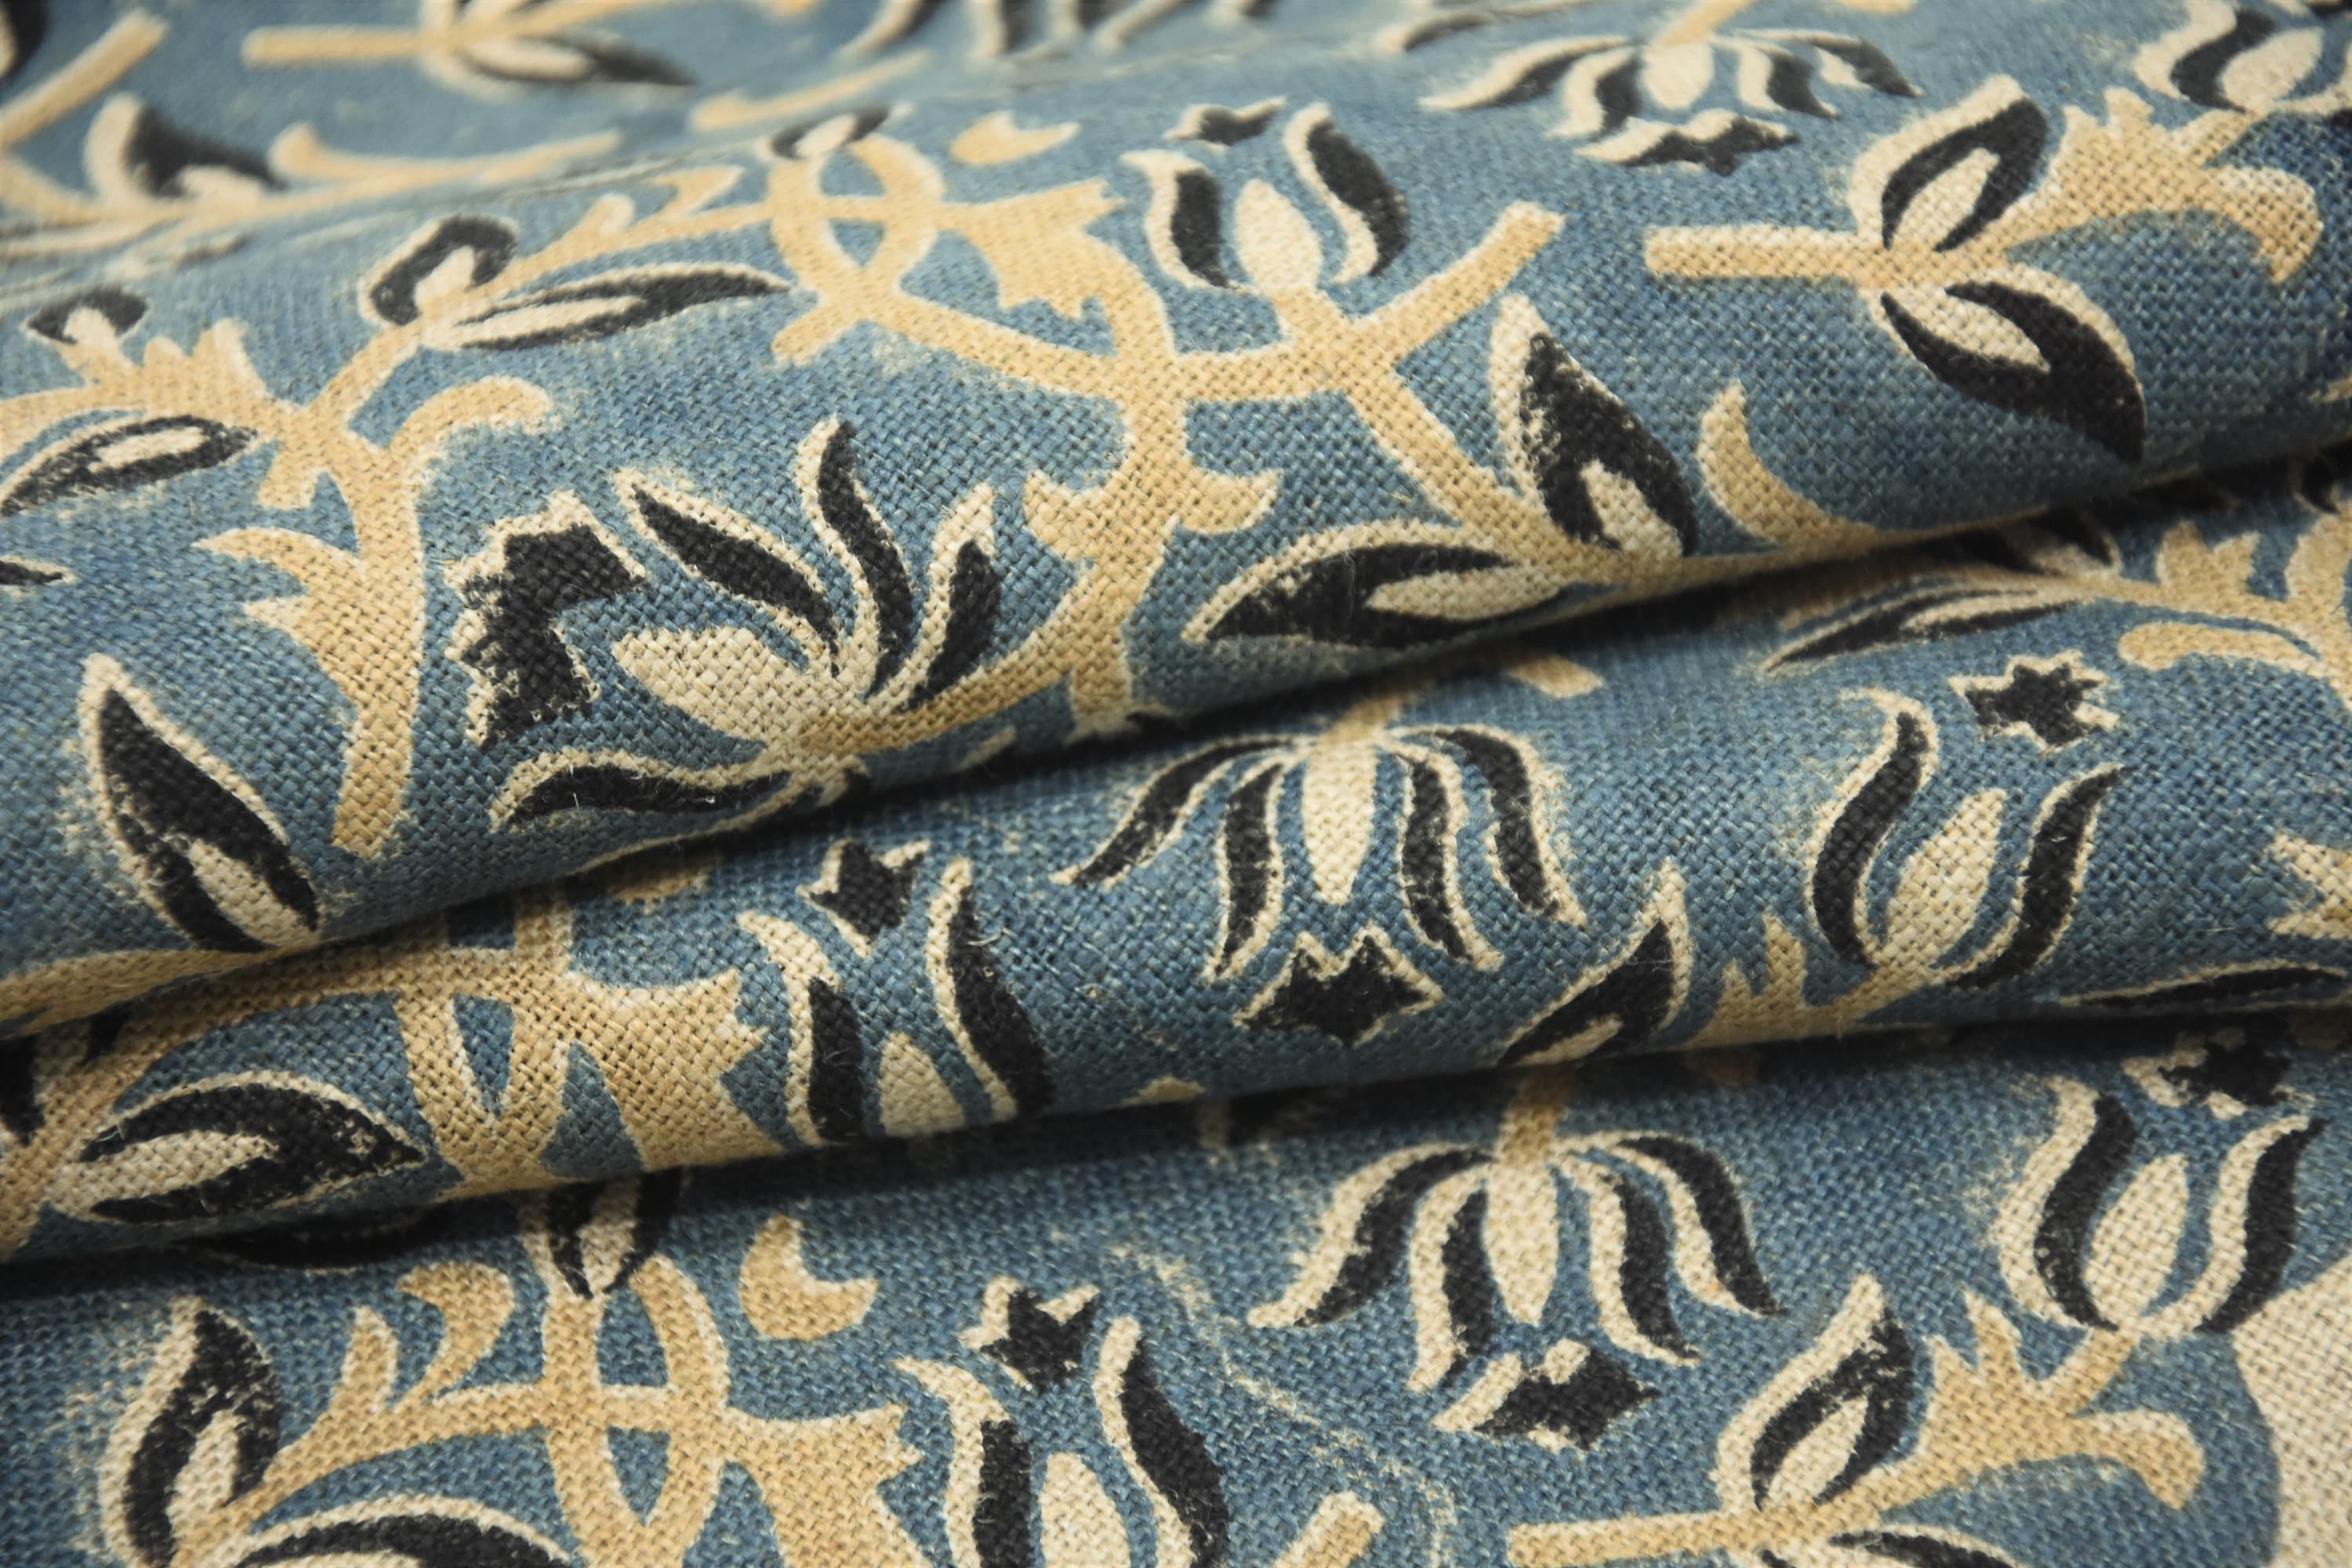 Thick Linen 58" Wide, Block Print Fabric, Floral Print, Indian Curtain Cover, Pillow Cover, Fabric By Yard - KAMAL DUTTA